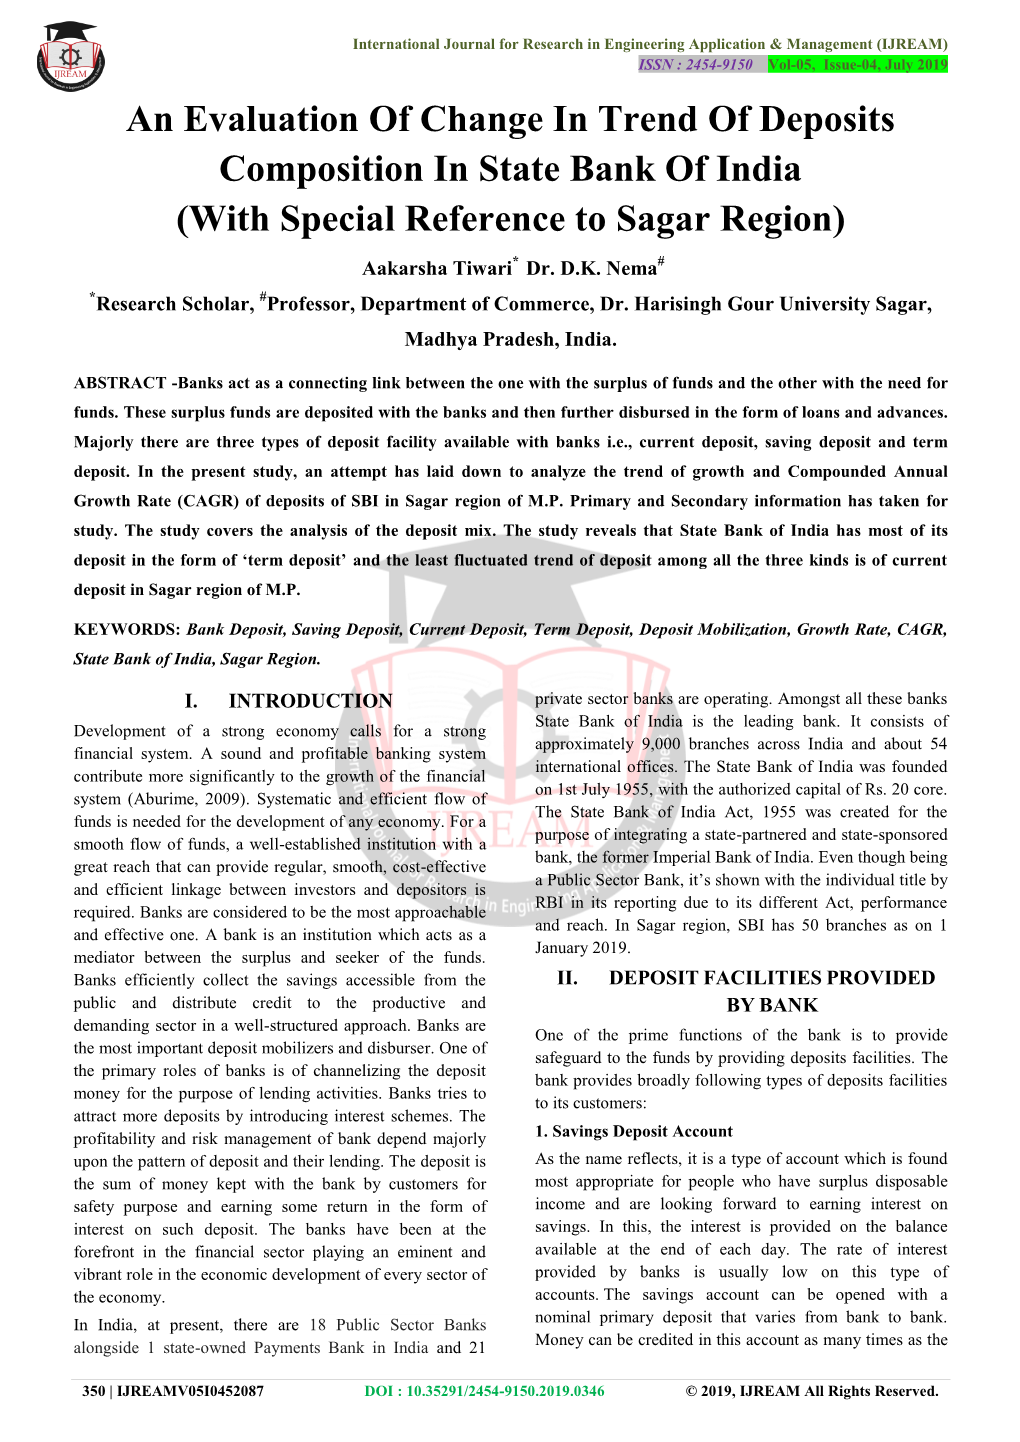 An Evaluation of Change in Trend of Deposits Composition in State Bank of India (With Special Reference to Sagar Region) Aakarsha Tiwari* Dr